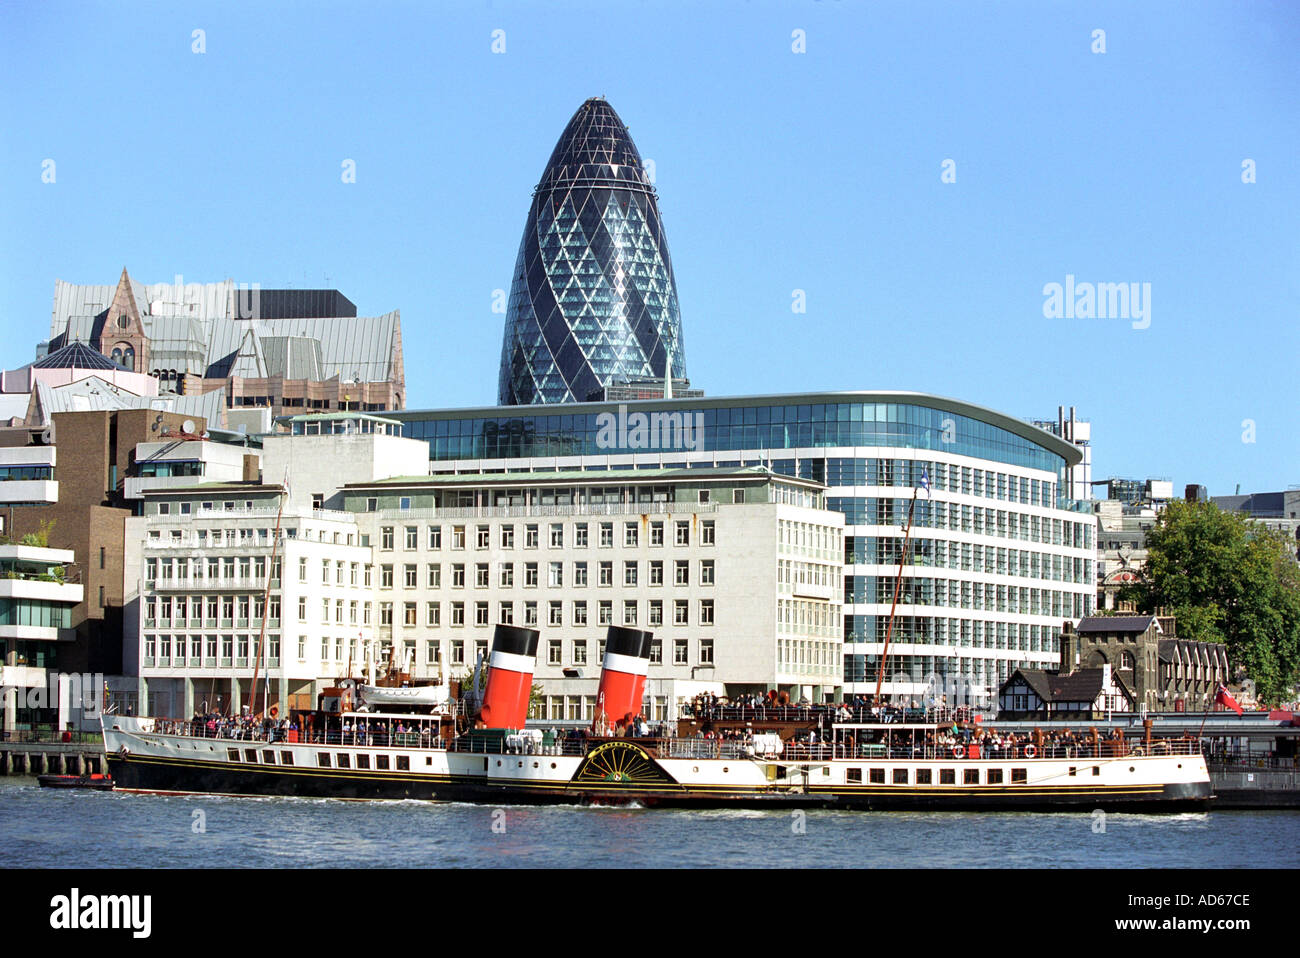 Paddle steamer Waverley on the river Thames in London Britain UK Stock Photo